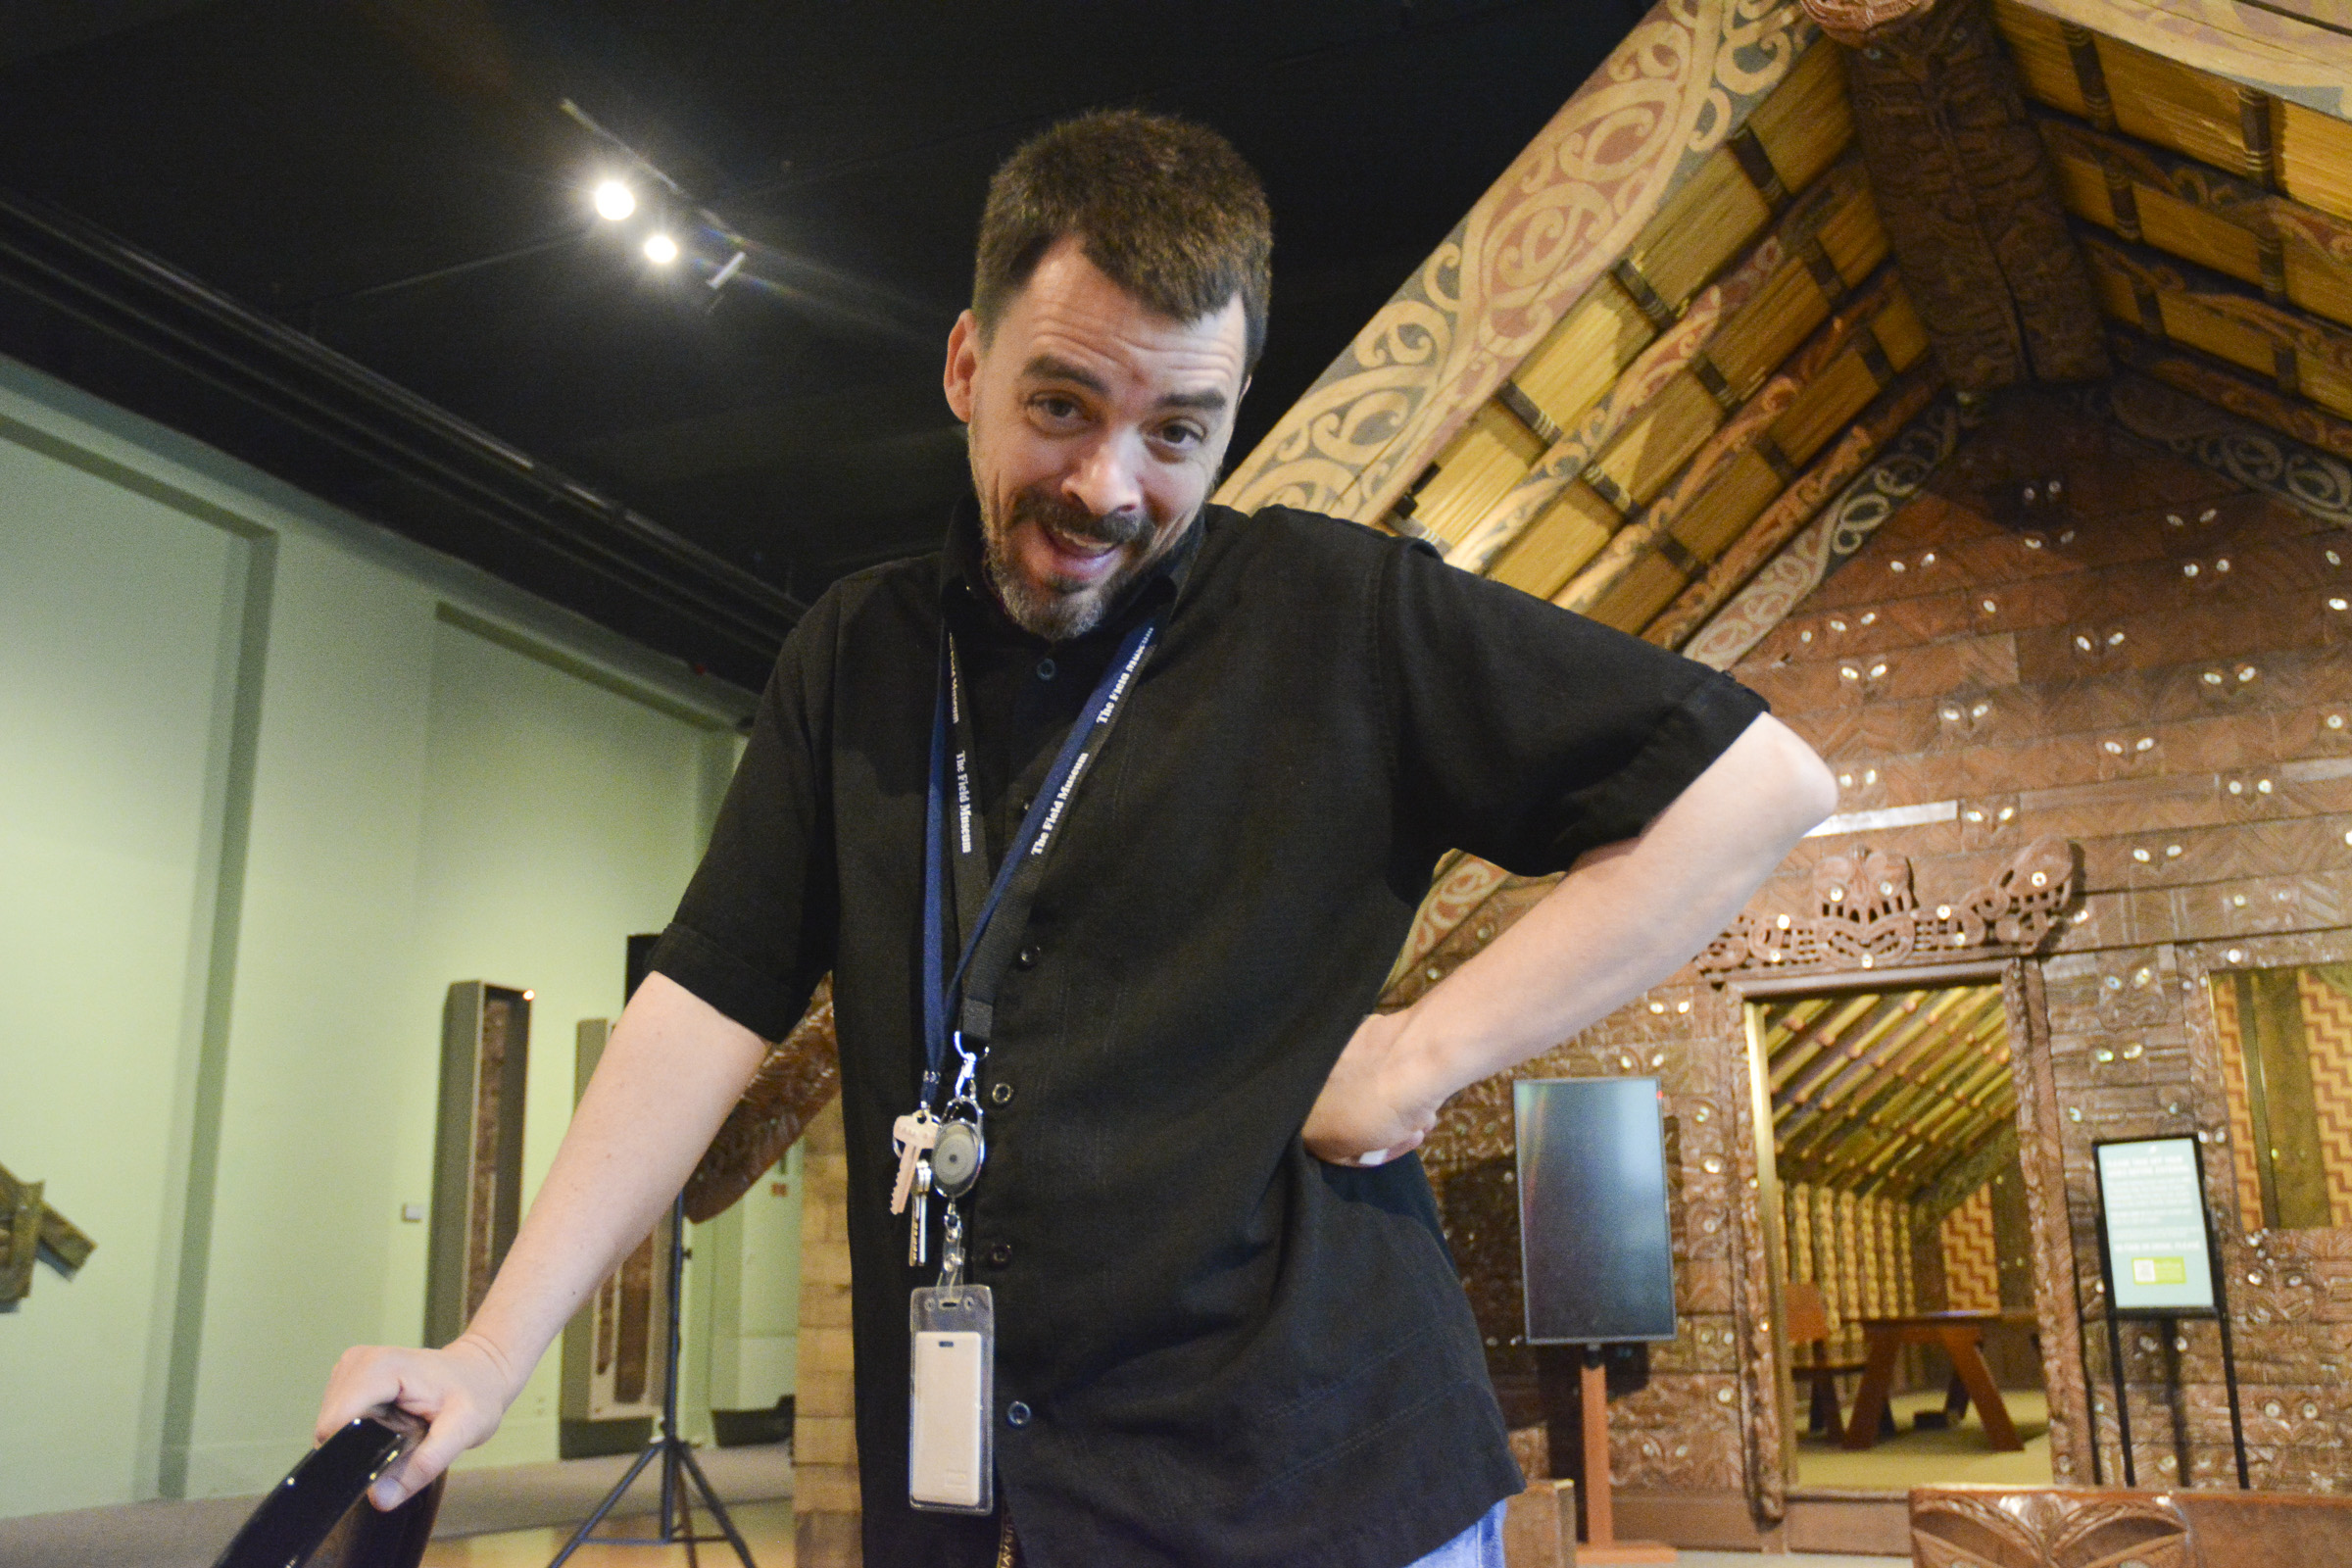 Neal Matherne in the Marae at the start of the first Homeland Memories Event. (c) Field Museum of Natural History - CC BY-NC 4.0